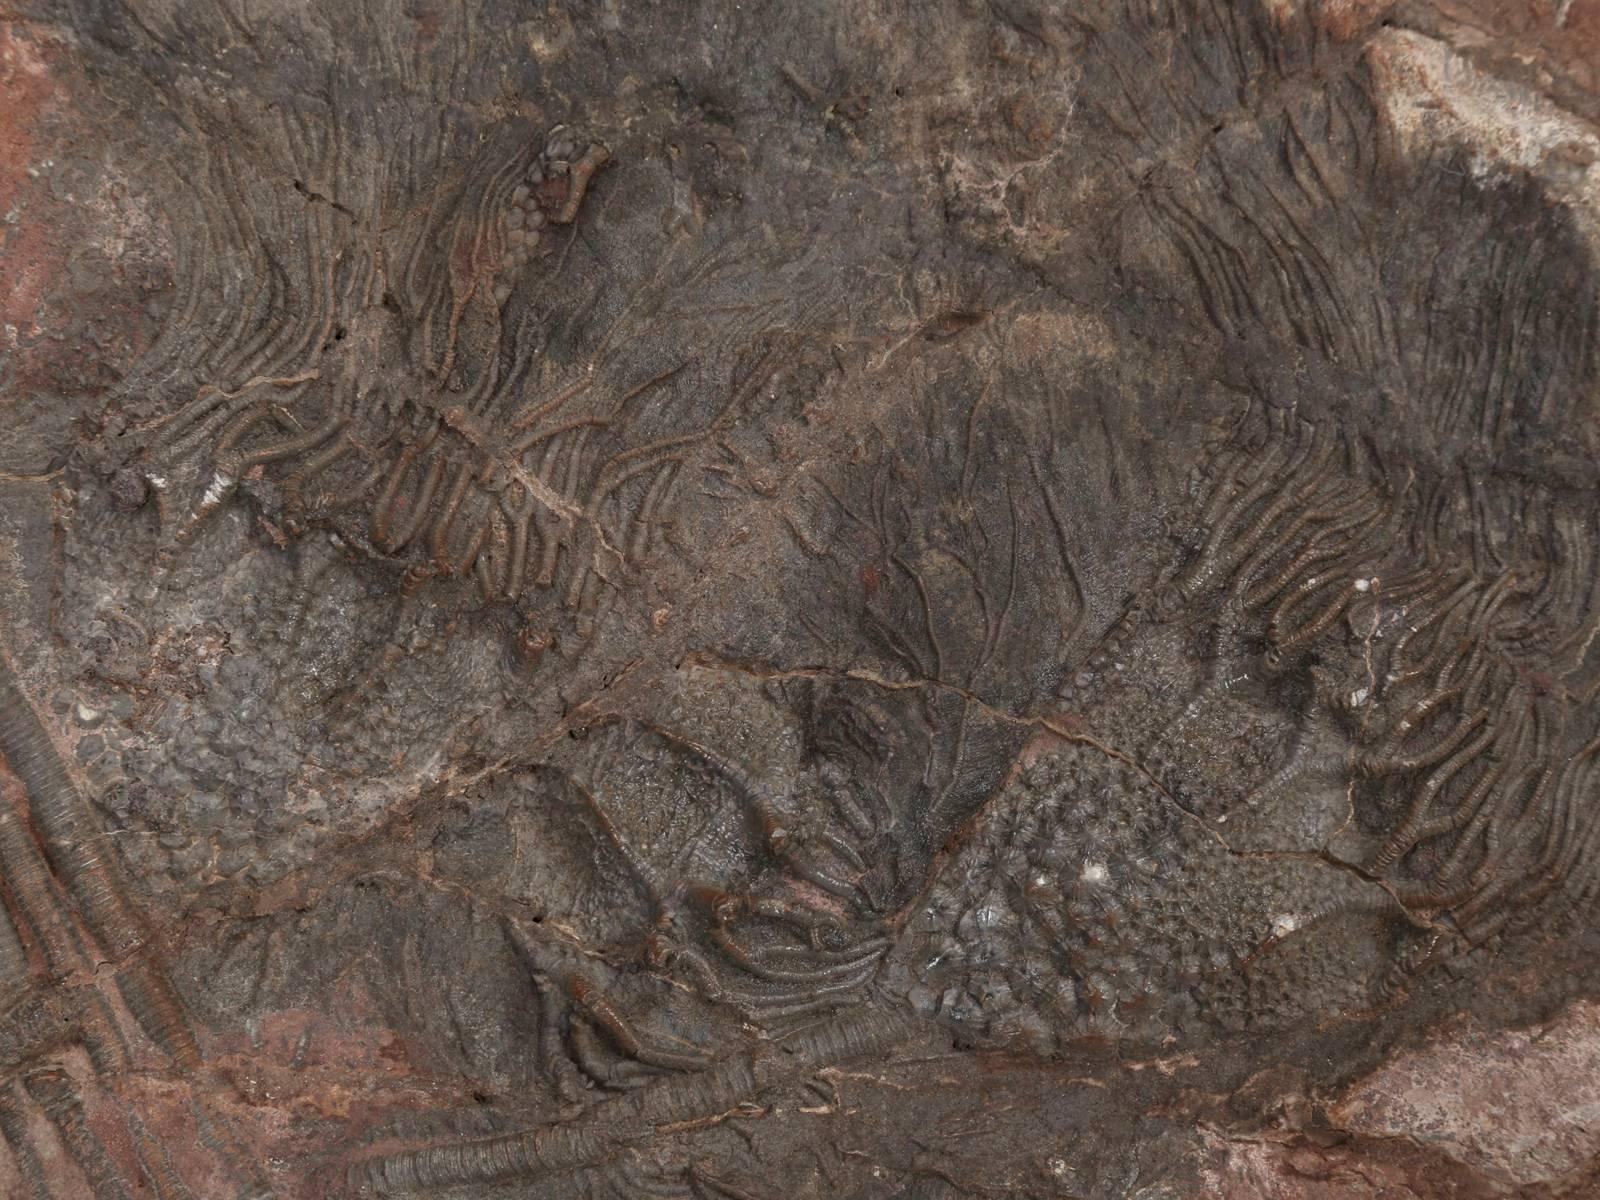 Crinoid Fossil from Morocco, about 450 Million Years Old (18. Jahrhundert und früher)